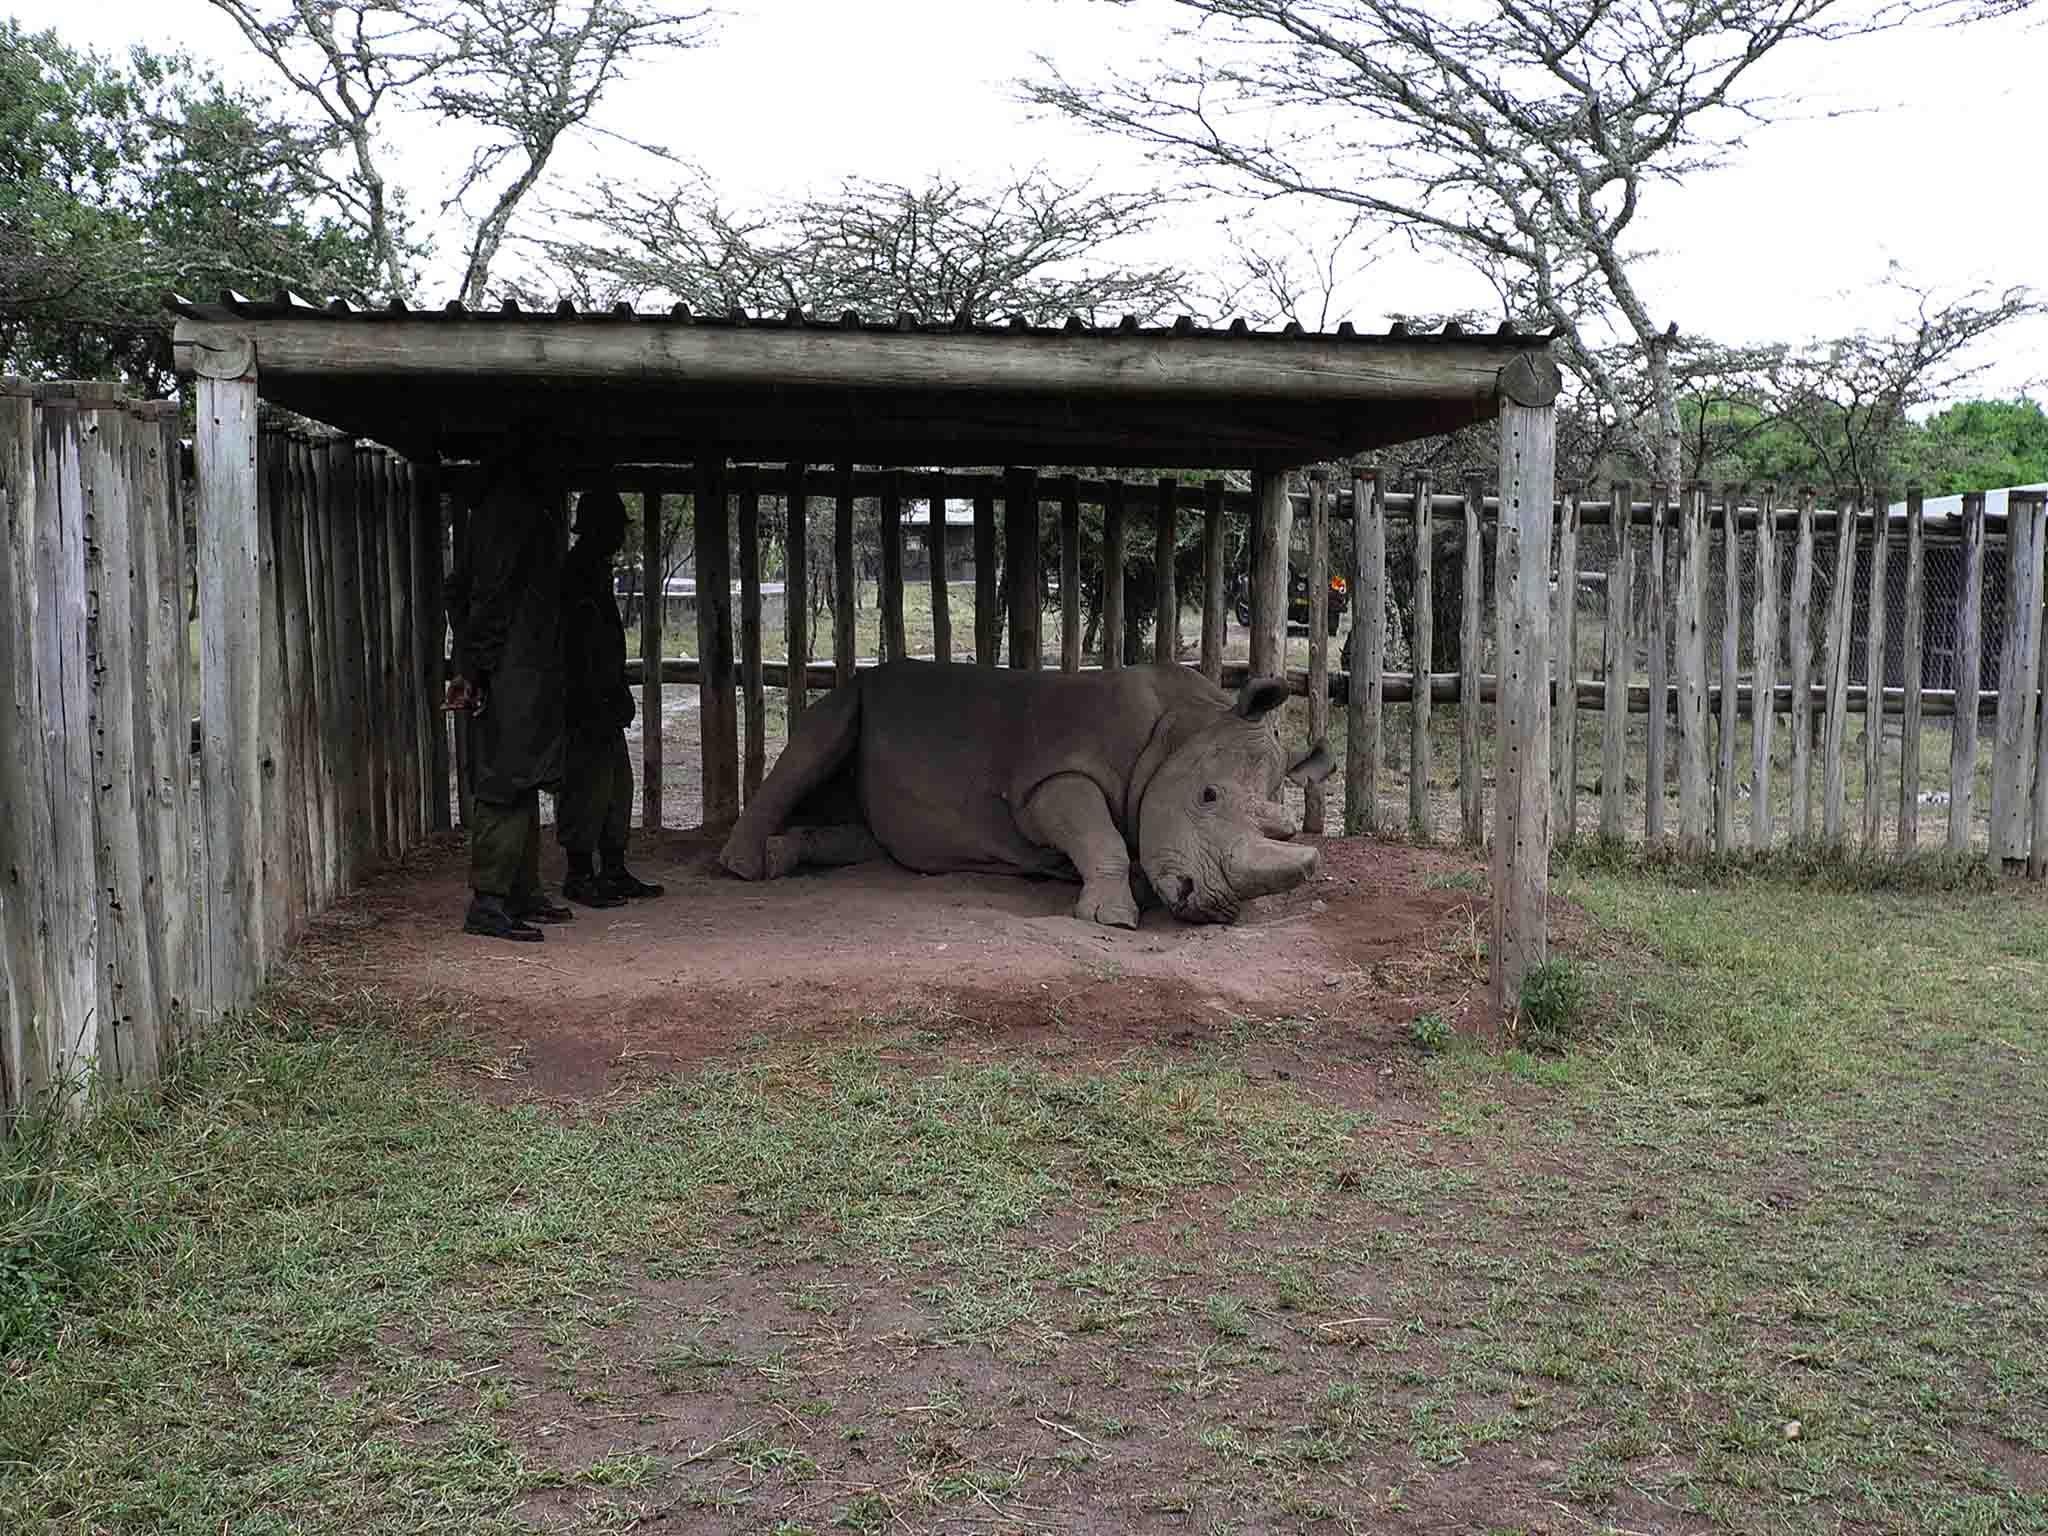 Here is ‘Sudan’, the very last northern white rhino male, who has had to be housed in a secure compound near where the summit was hosted after its species was hunted to the brink of extinction.